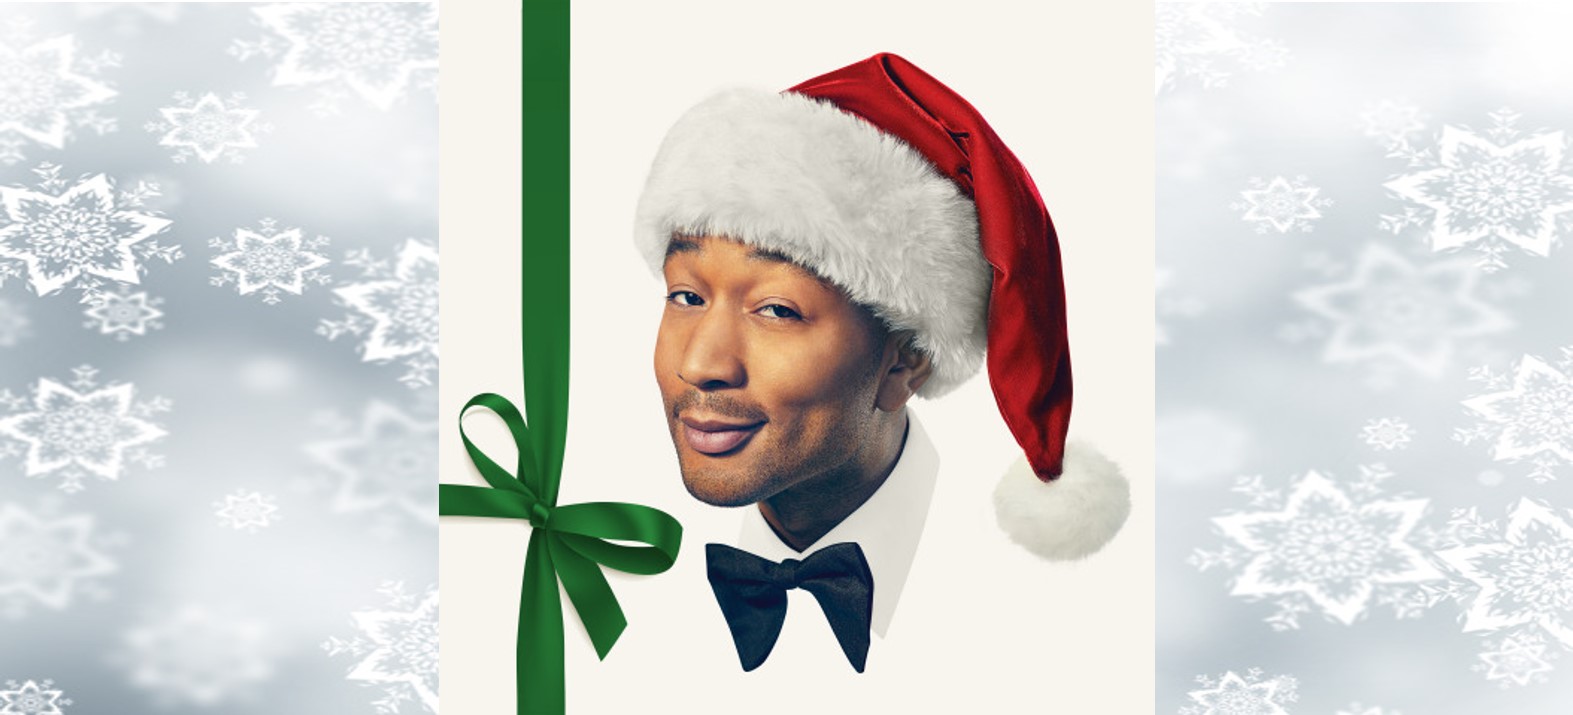 John Legend releases cover version of “Happy Christmas (War Is Over)” – Ace News Today